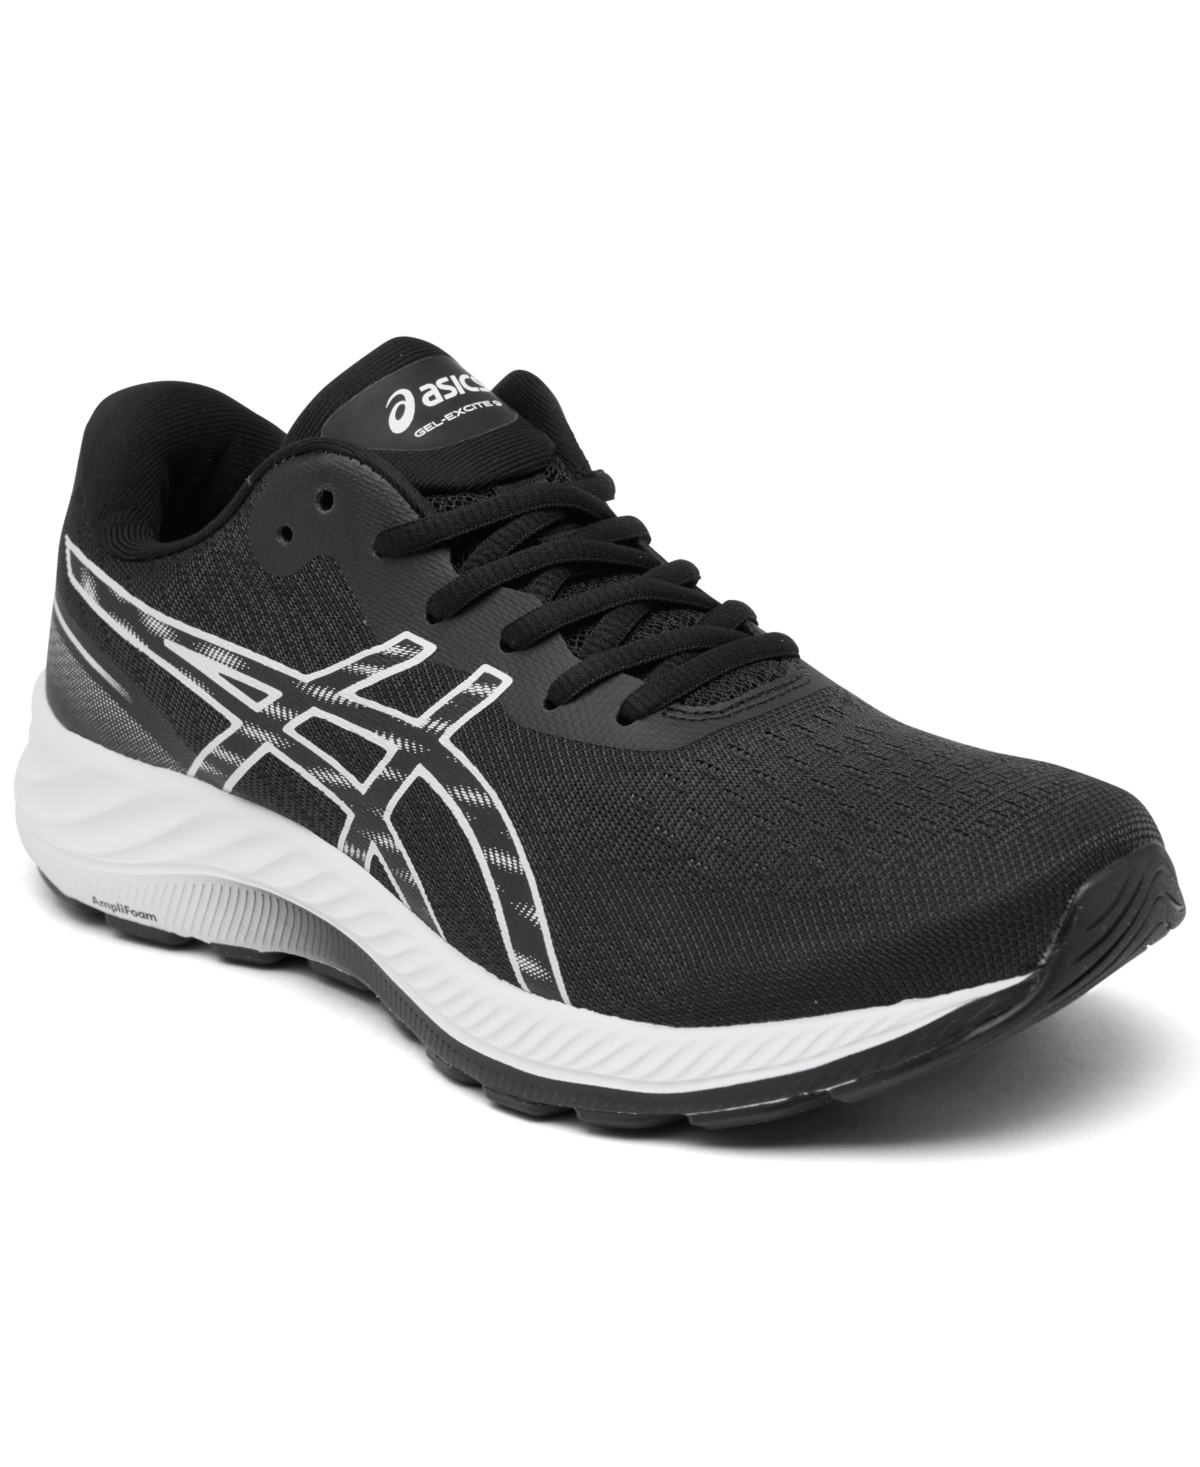 asics-women-s-gel-contend-7-running-sneakers-from-finish-line-in-black